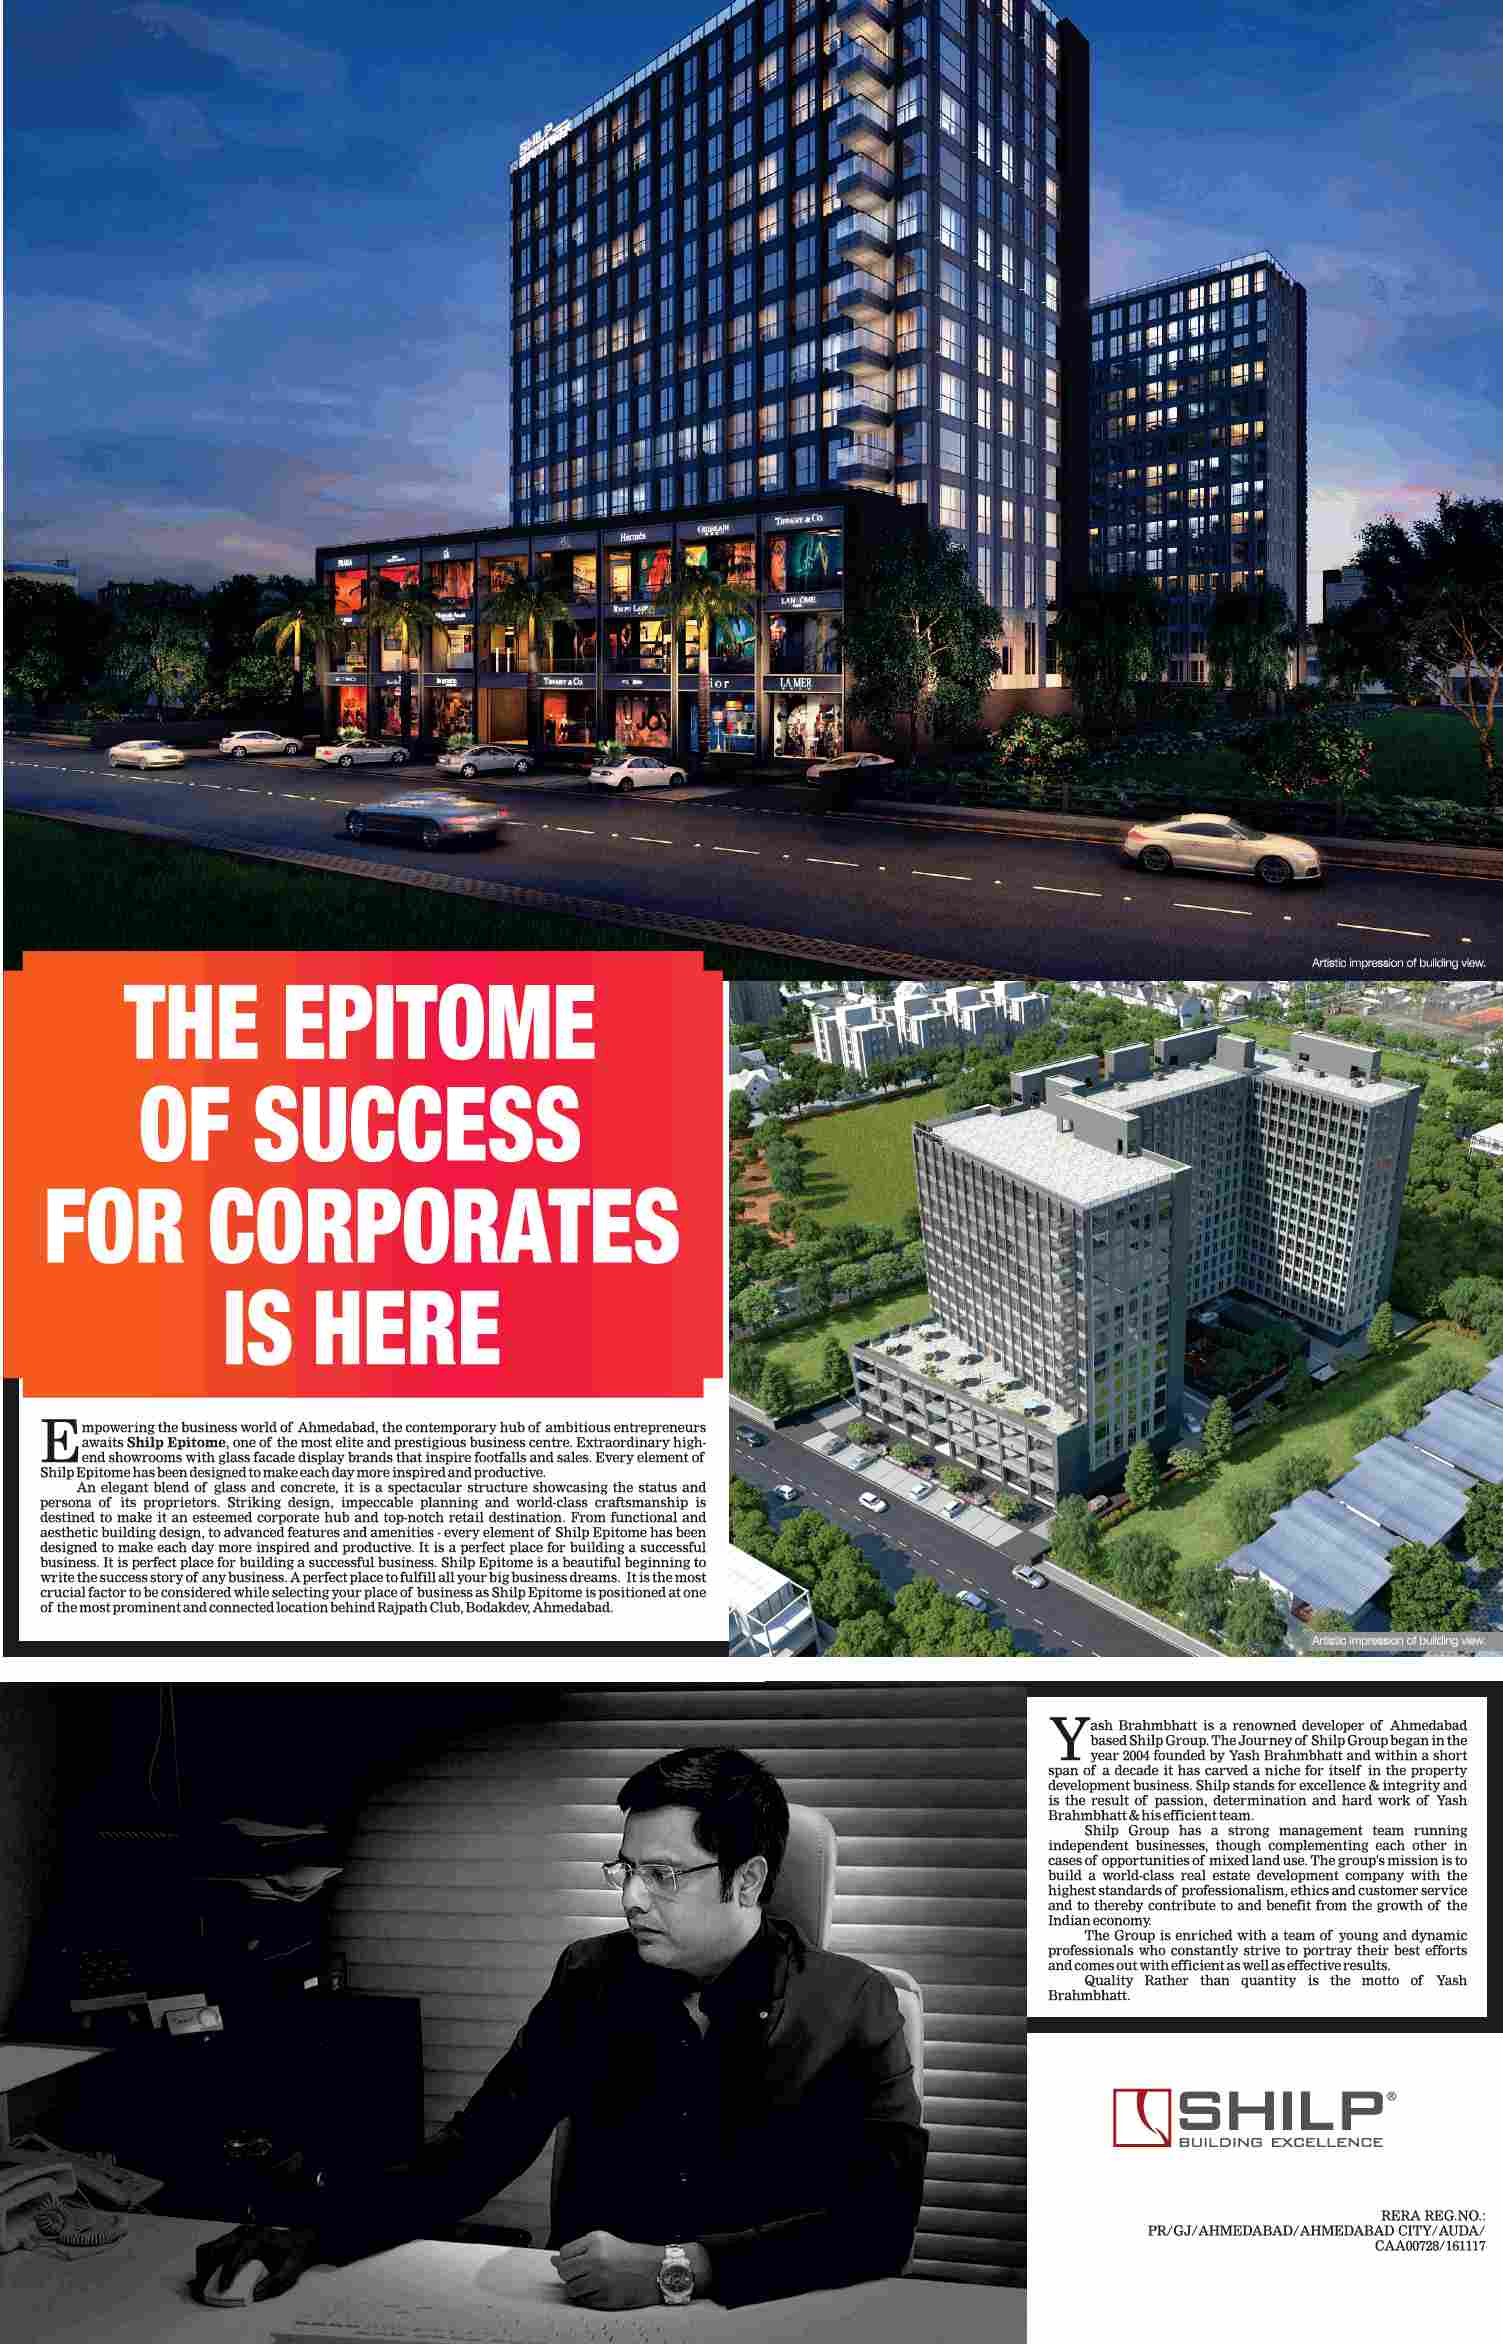 The epitome of success for corporates is here at Shilp Epitome in Ahmedabad